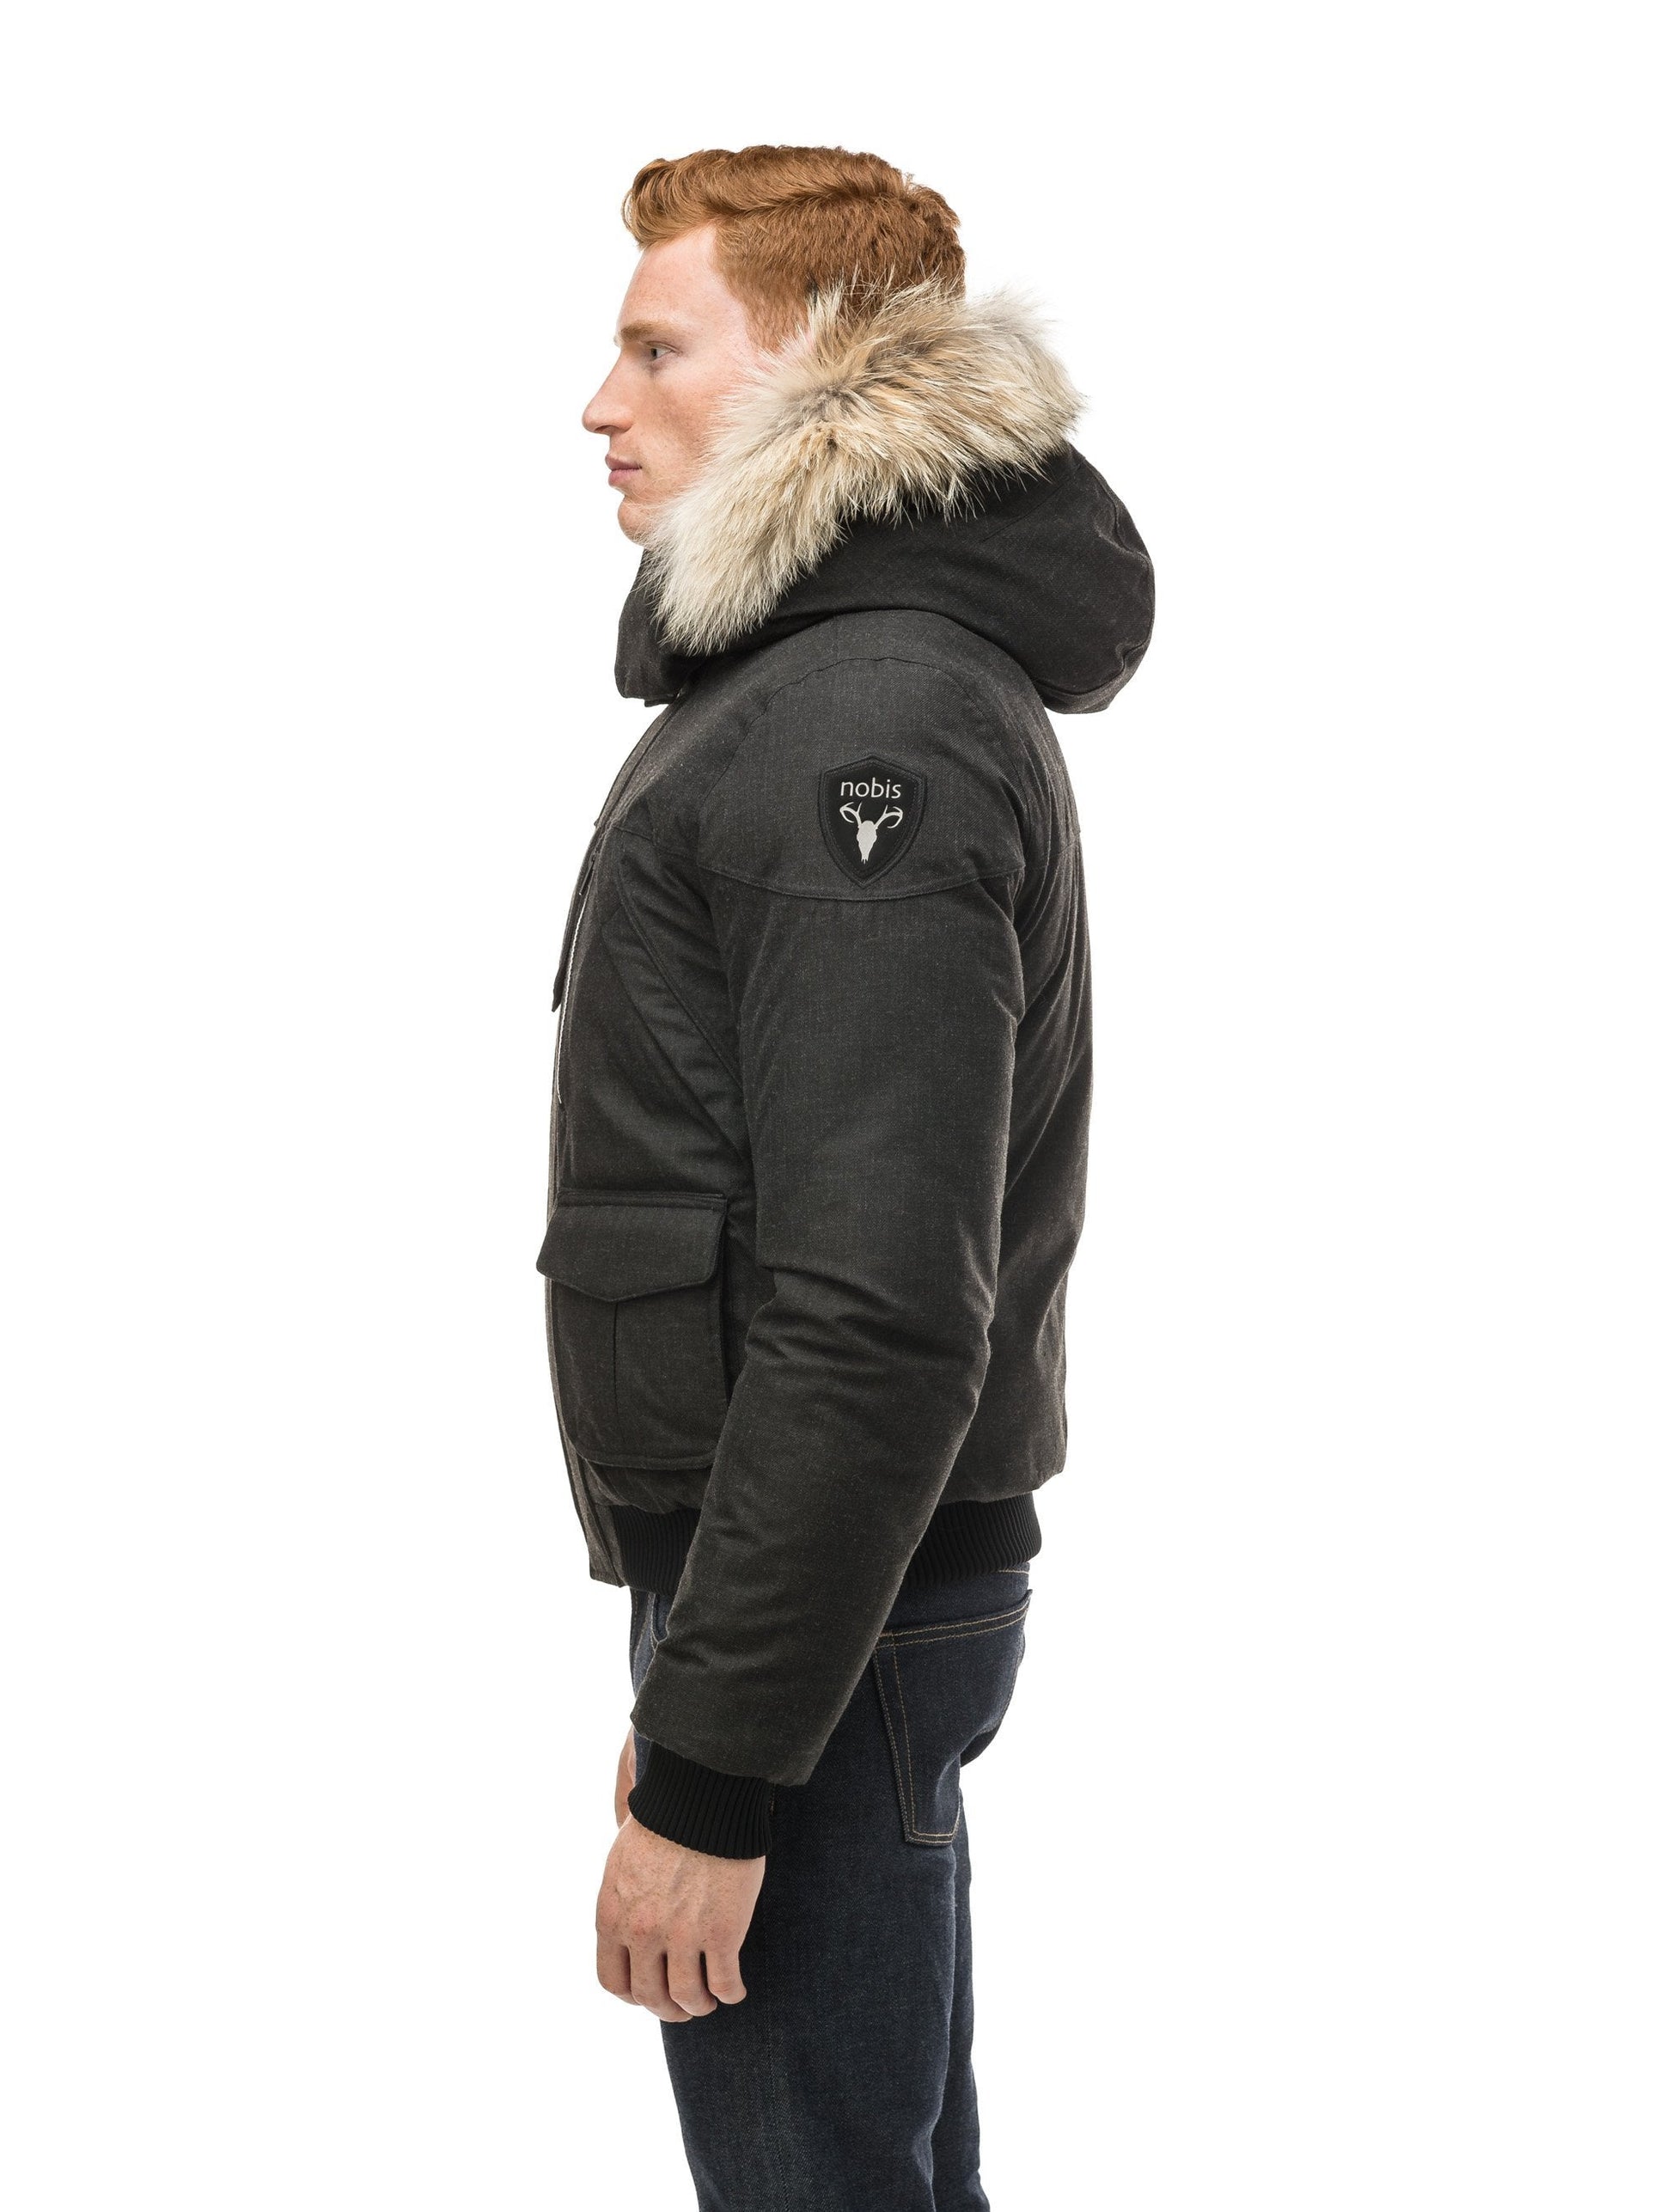 Men's classic down bomber with two patch pockets and a right shoulder storm flap in H. Black